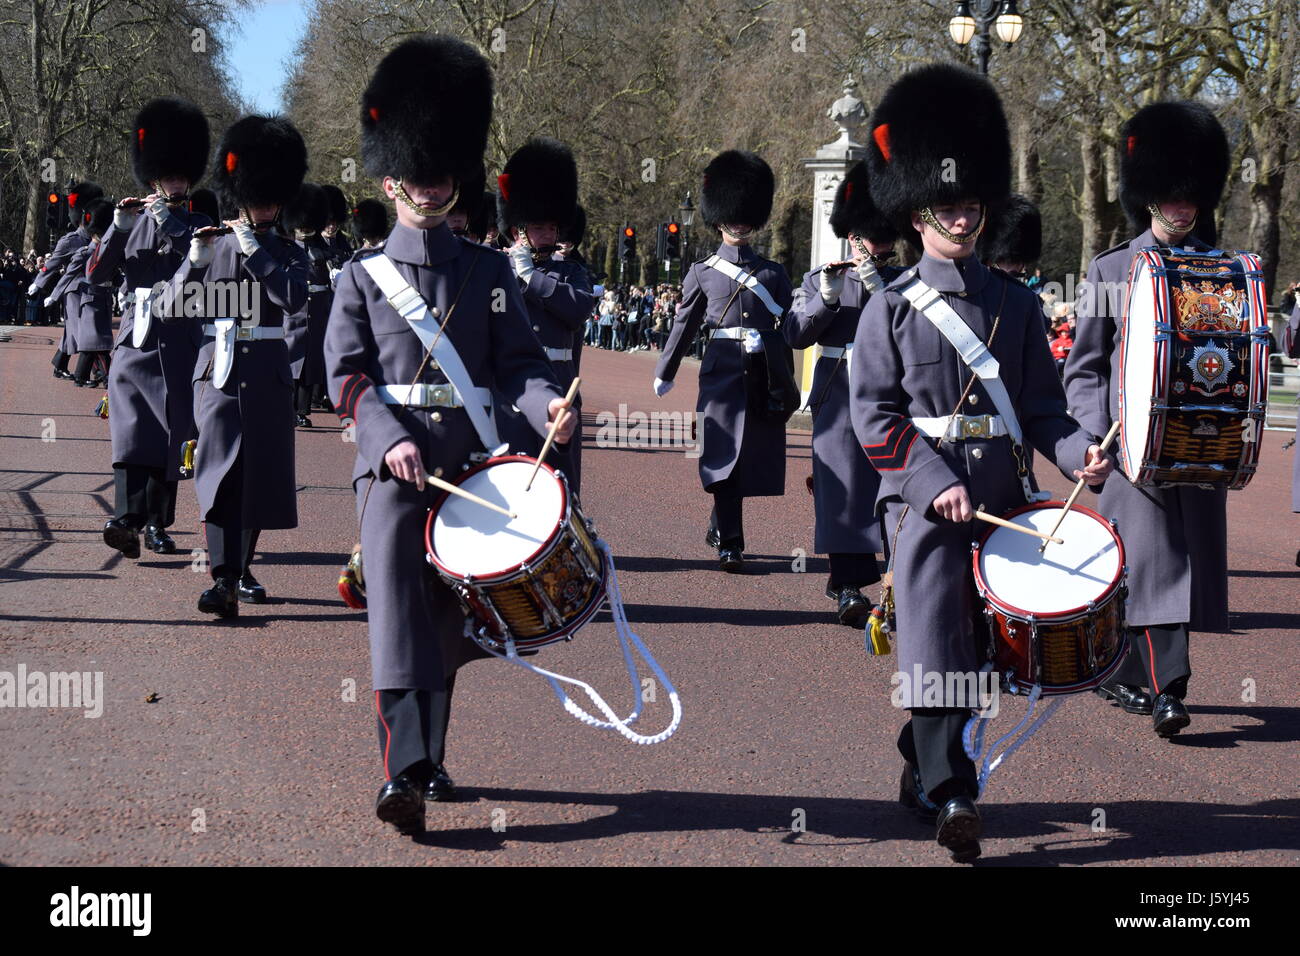 Changing of the Guard at Buckingham Palace / Grenadier Guards Marching Stock Photo